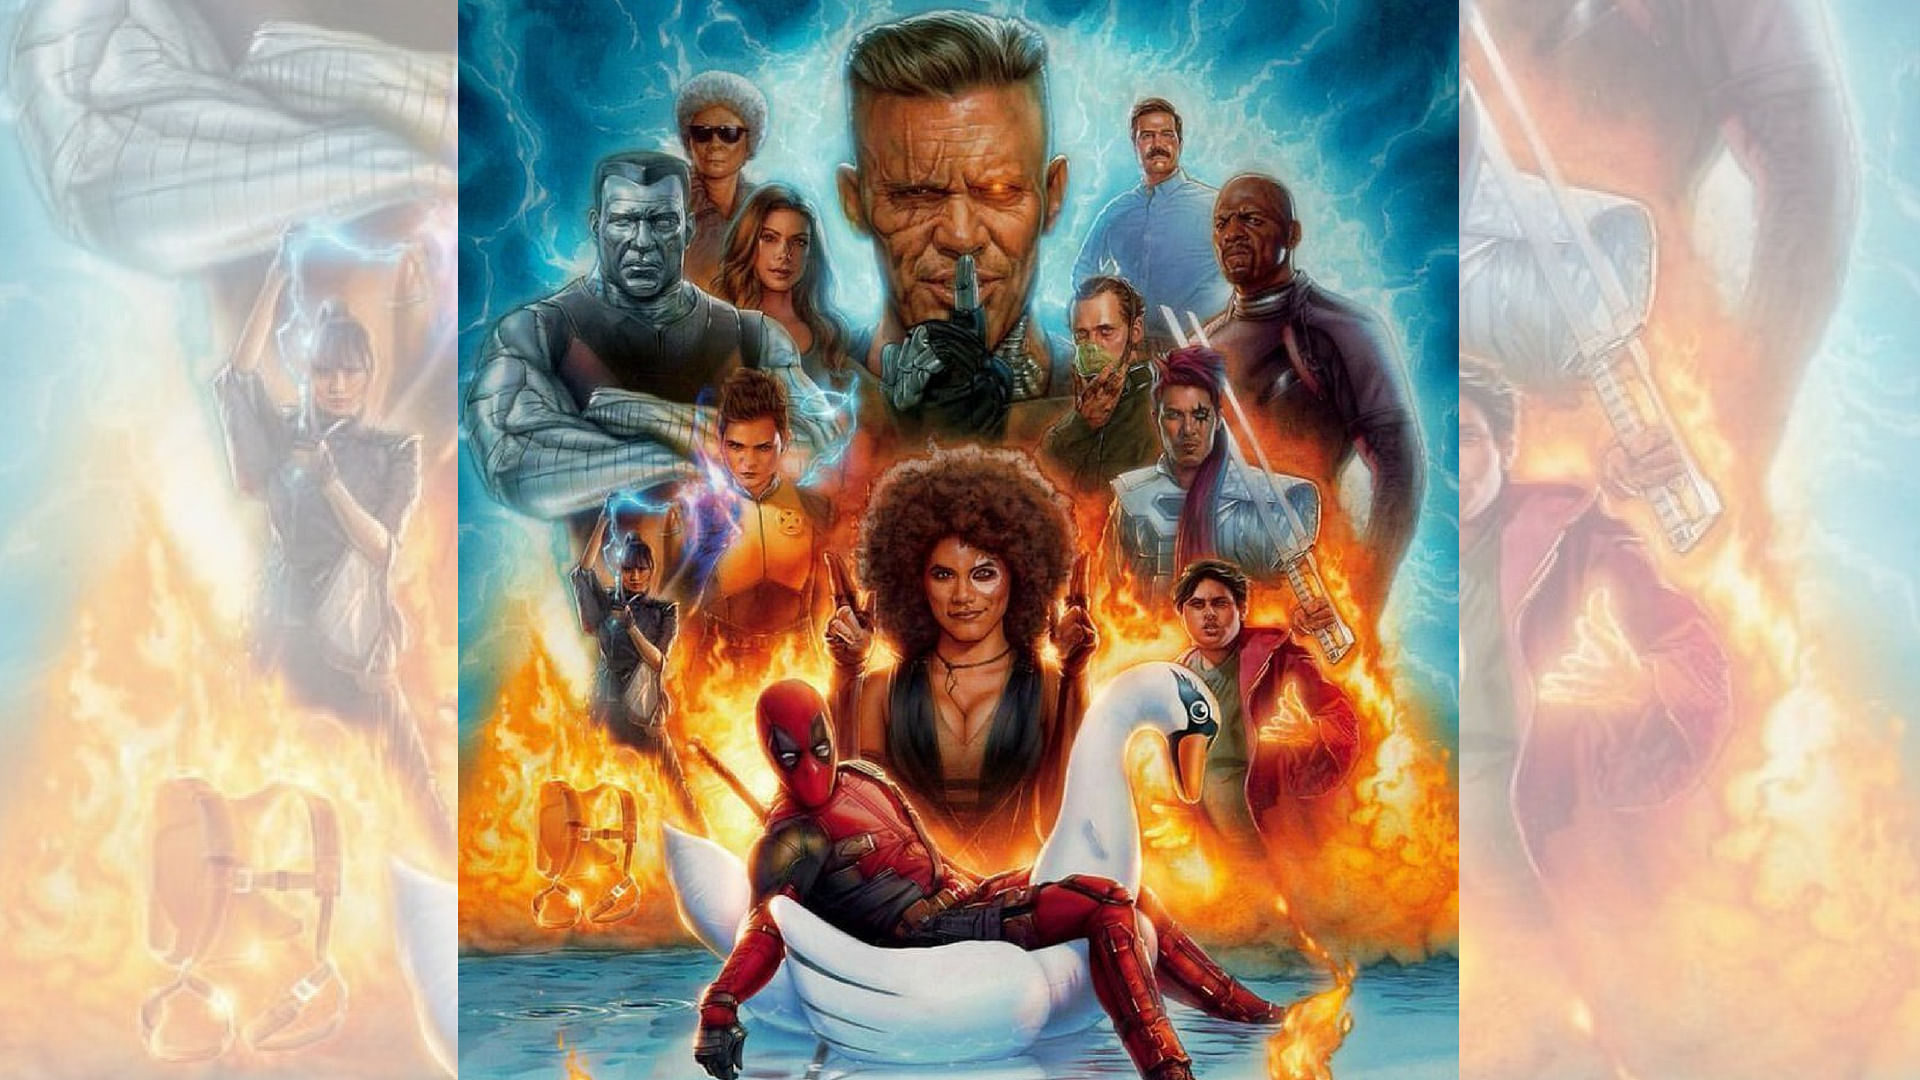 The ‘merc with a mouth’ is joined by Domino, Bedlam, Shatterstar, Negasonic Teenage Warhead, Colossus, Surge, and Peter Wisdom, among others in ‘Deadpool 2’.